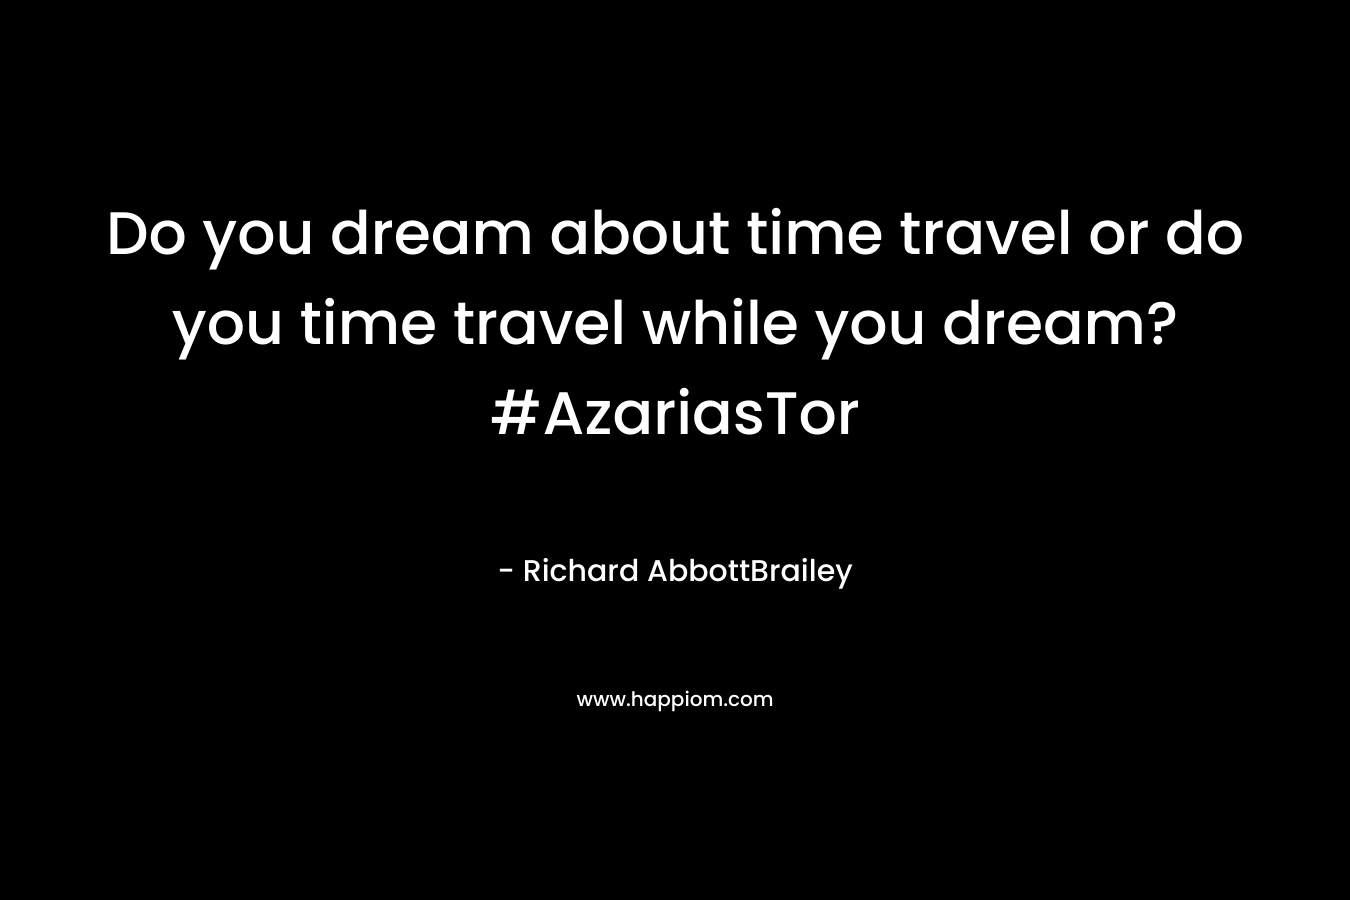 Do you dream about time travel or do you time travel while you dream? #AzariasTor – Richard AbbottBrailey